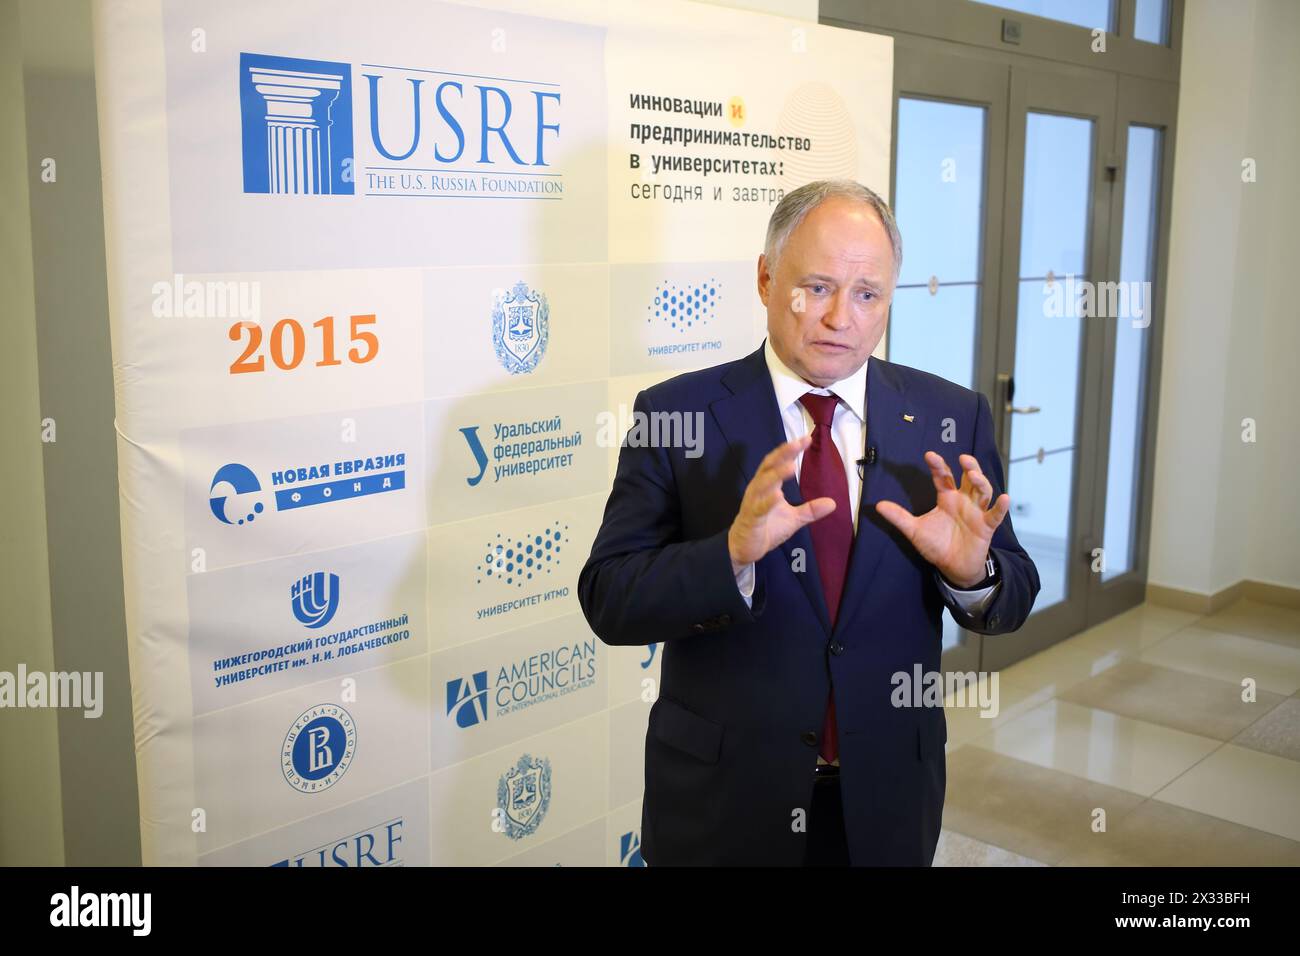 RUSSIA, MOSCOW - 18 MAY, 2015: Man is giving interview at conference the U.S. Russia Foundation in MSTU of N.E. Bauman. Stock Photo